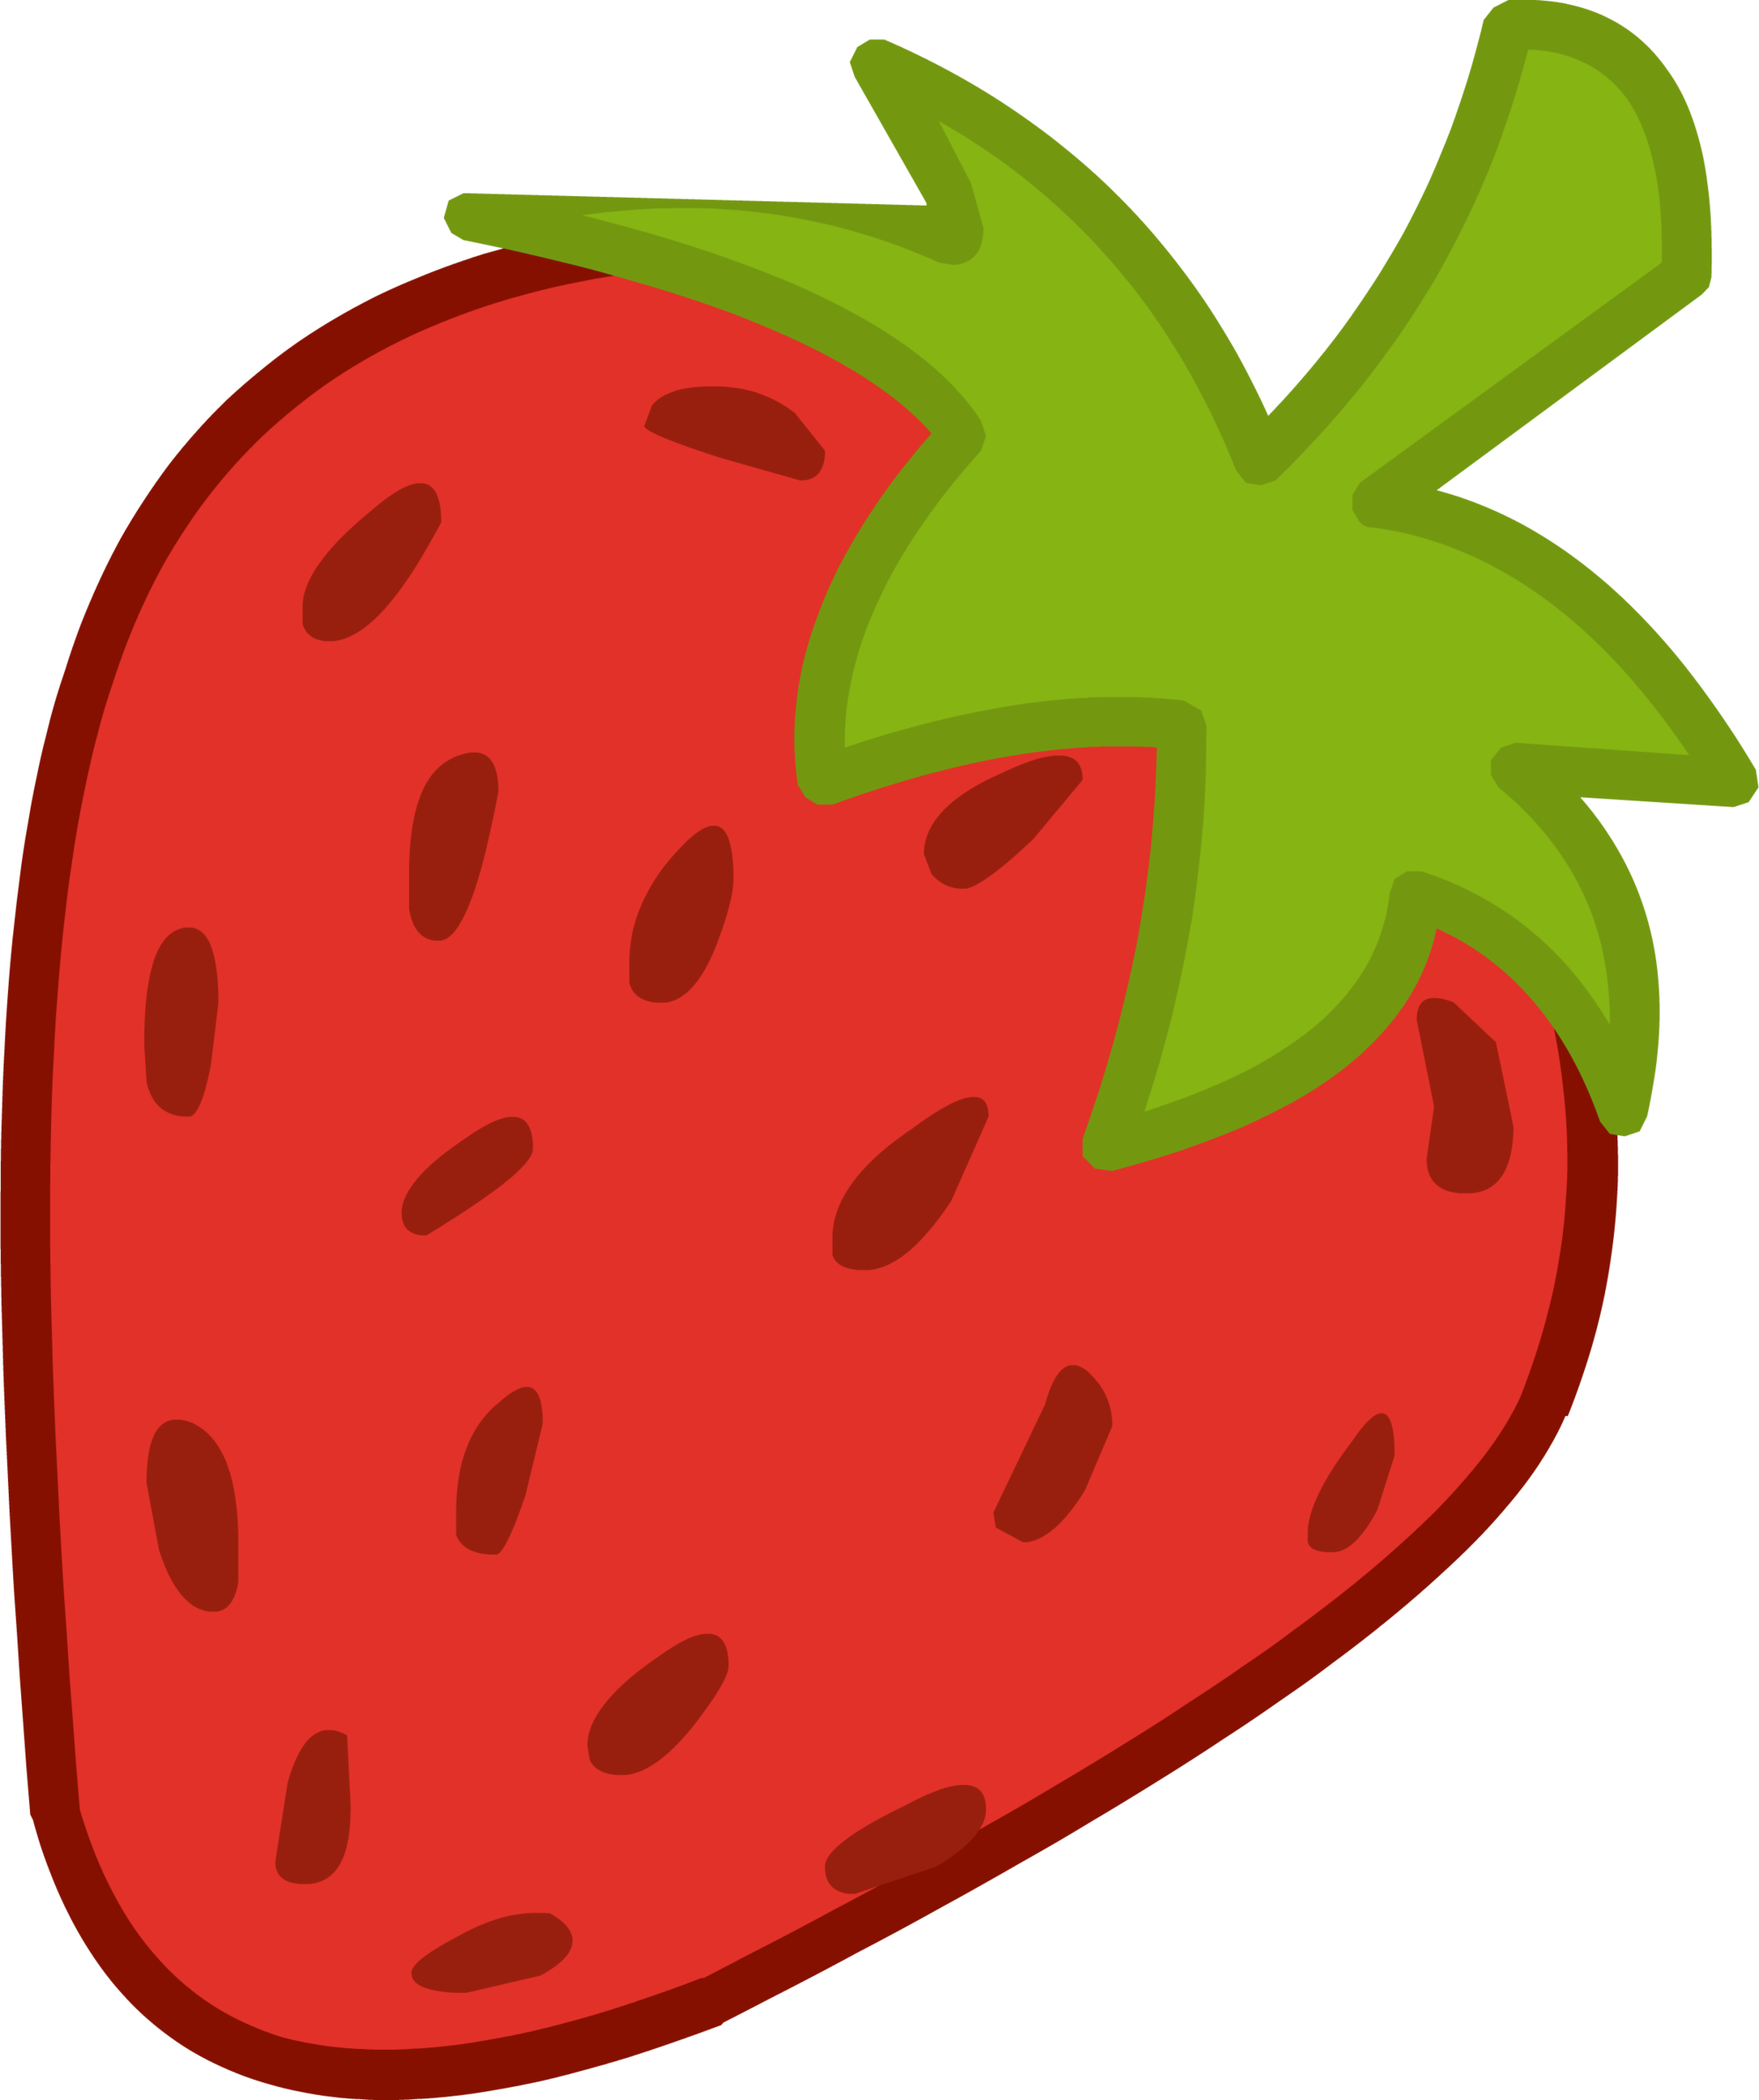 Strawberries clipart four. Image happystudio strawberry png